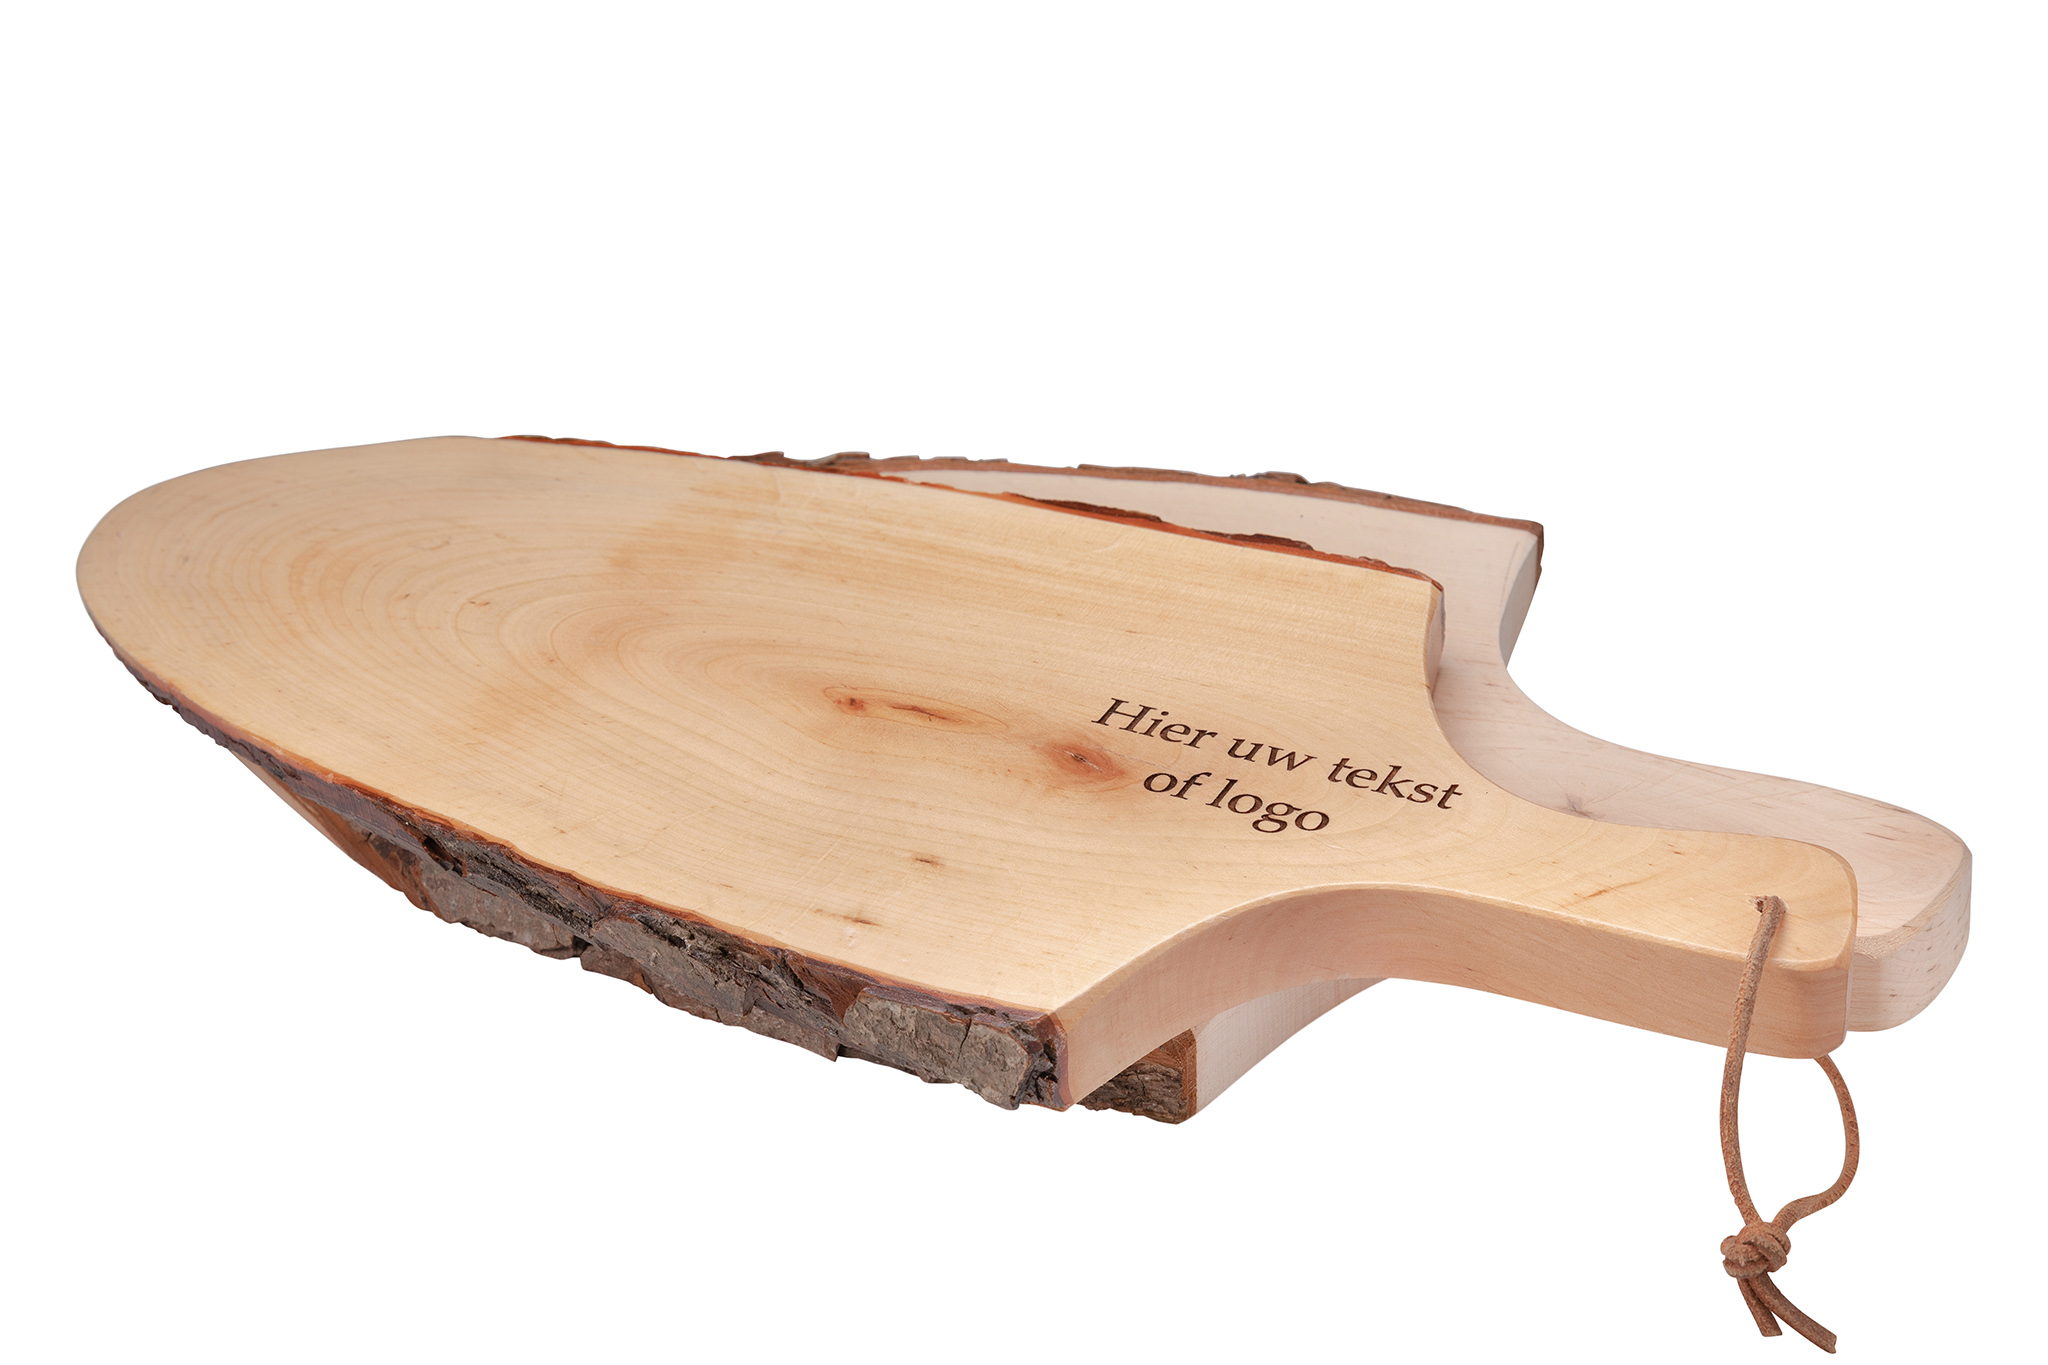 Customized alder serving board with handle - Laholm